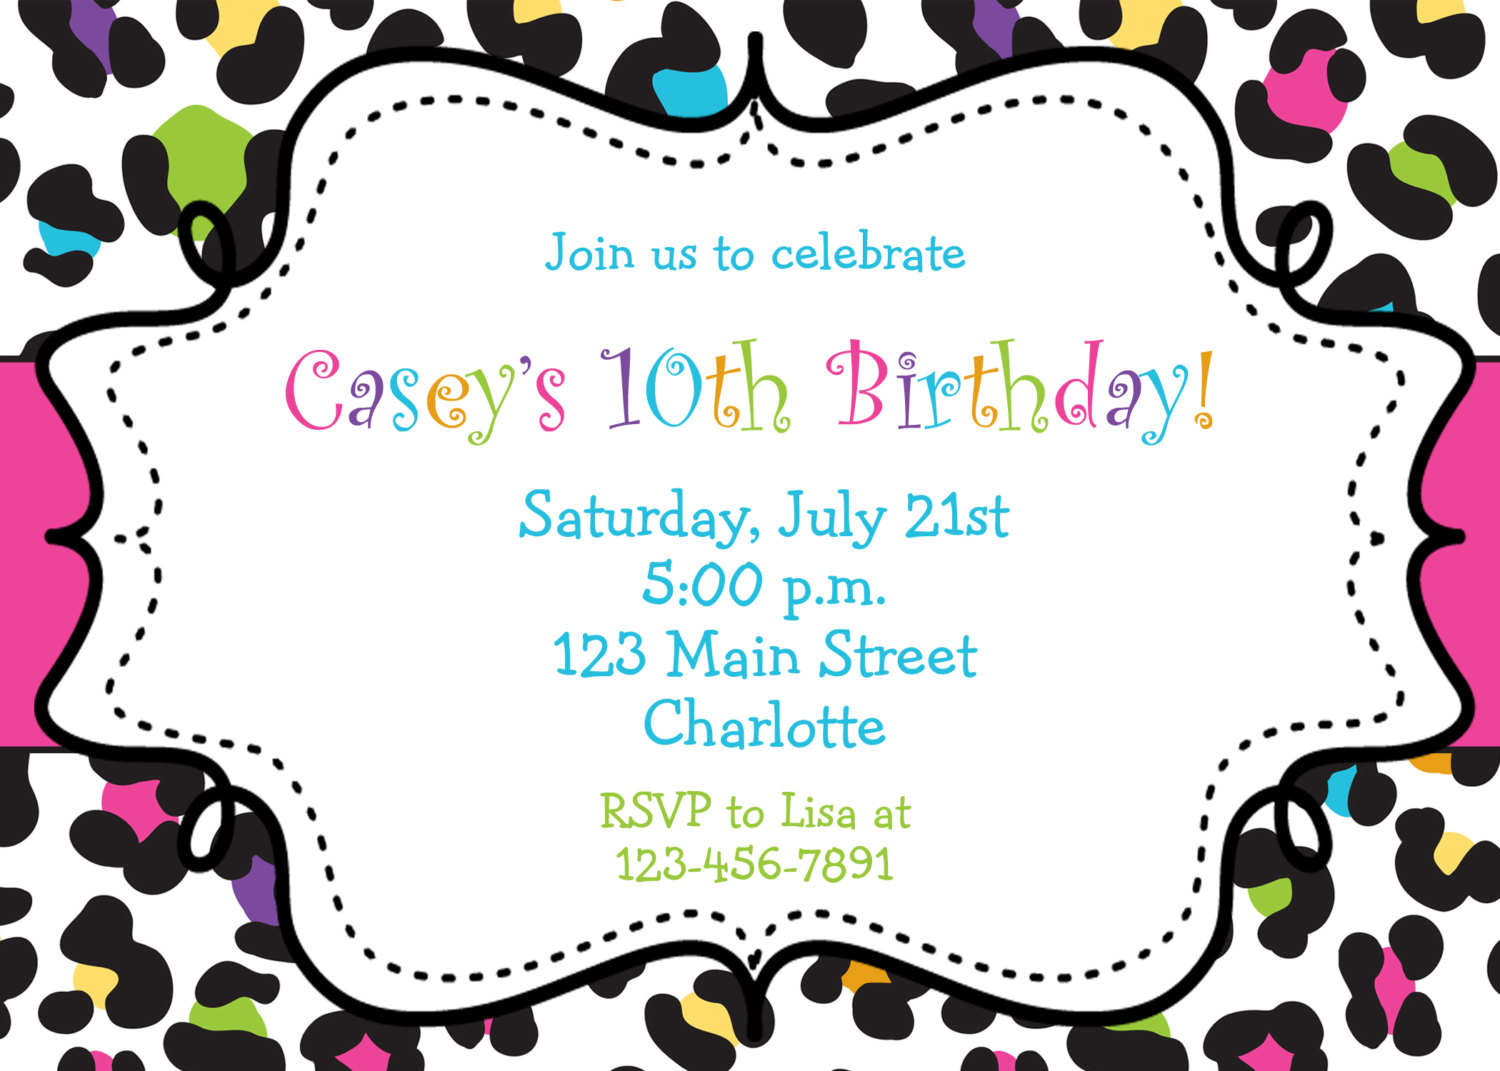 Leopard Print Party Invitations Hello Kitty With Cheetah Print ...